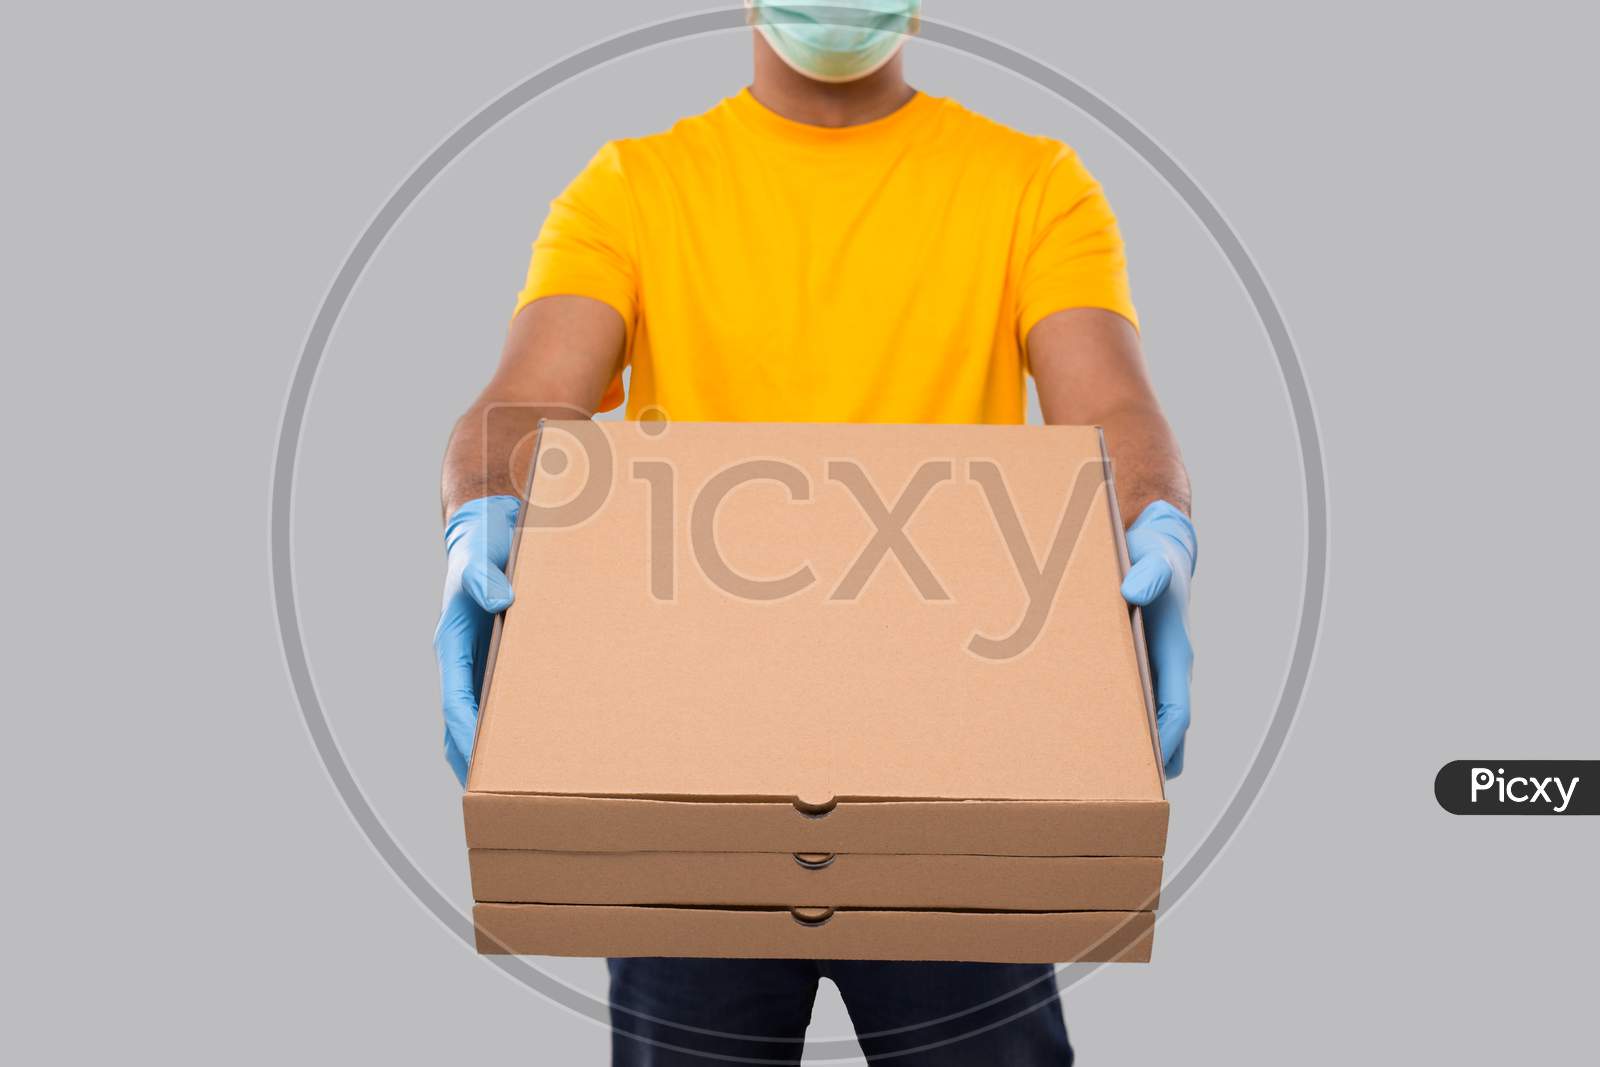 Delivery Man Three Pizza Box In Hands Wearing Medical Mask And Gloves Close Up Isolated. Yellow Tshirt Indian Delivery Boy. Man With Pizza In Hands